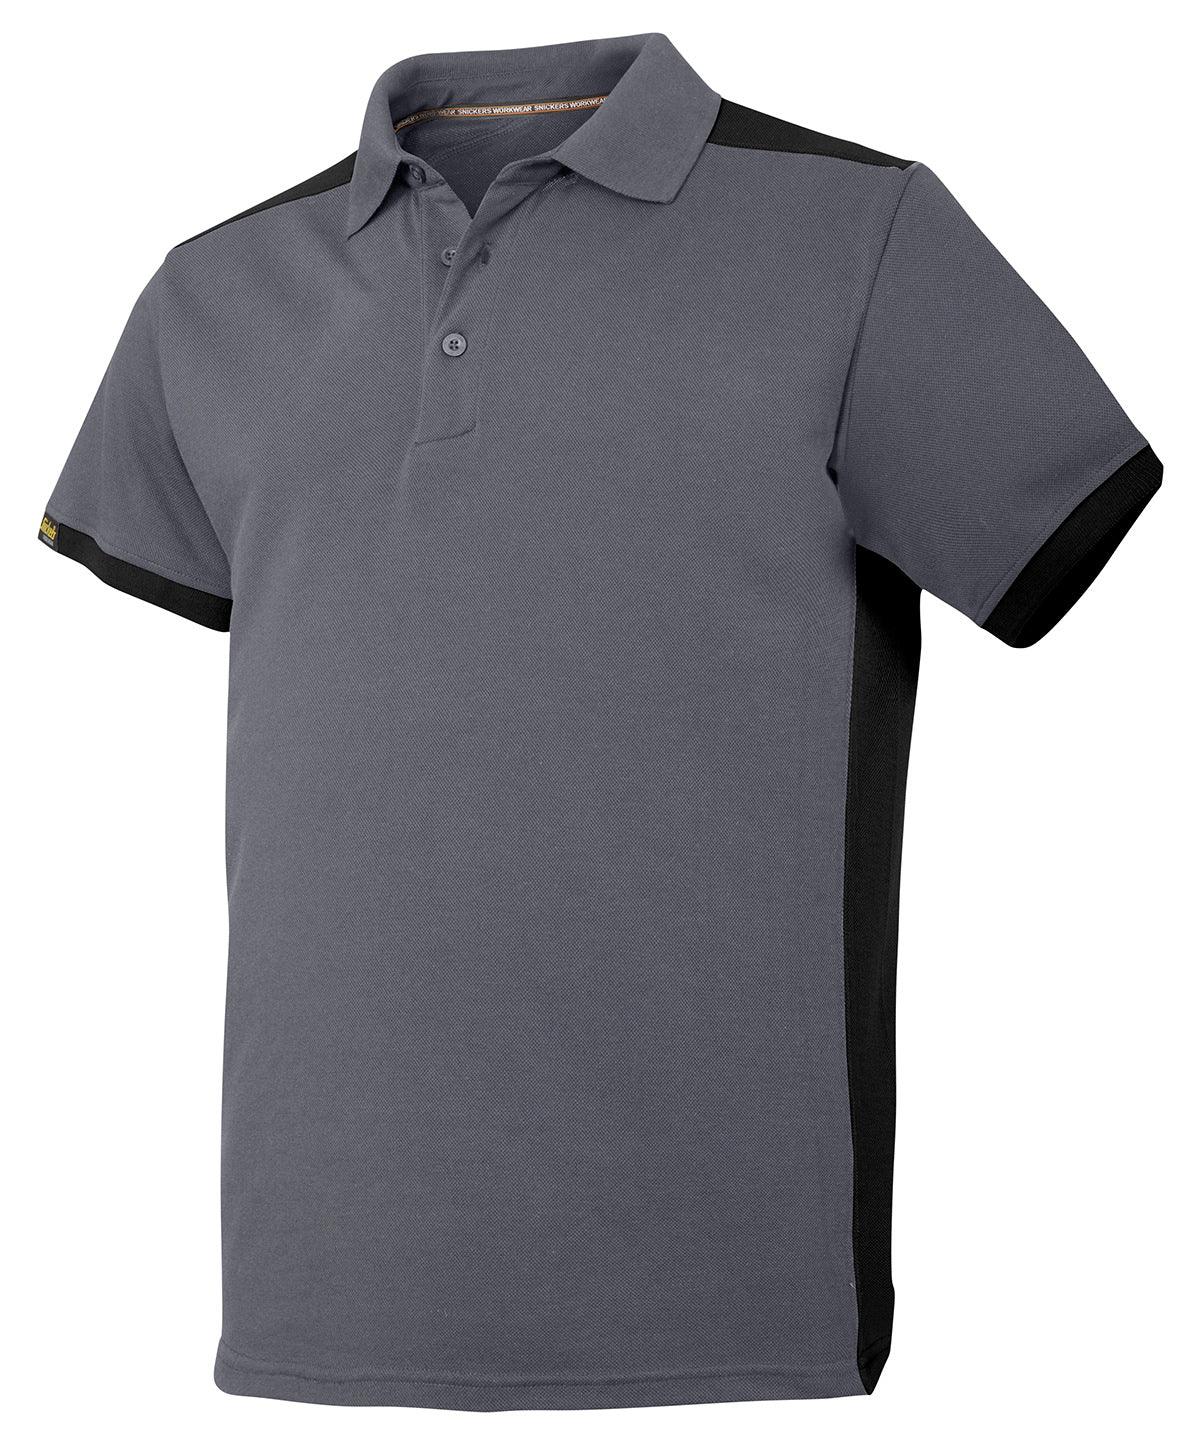 Petrol/Black - AllroundWork polo shirt (2715) Polos Snickers Exclusives, Must Haves, Polos & Casual, Safe to wash at 60 degrees, Workwear Schoolwear Centres